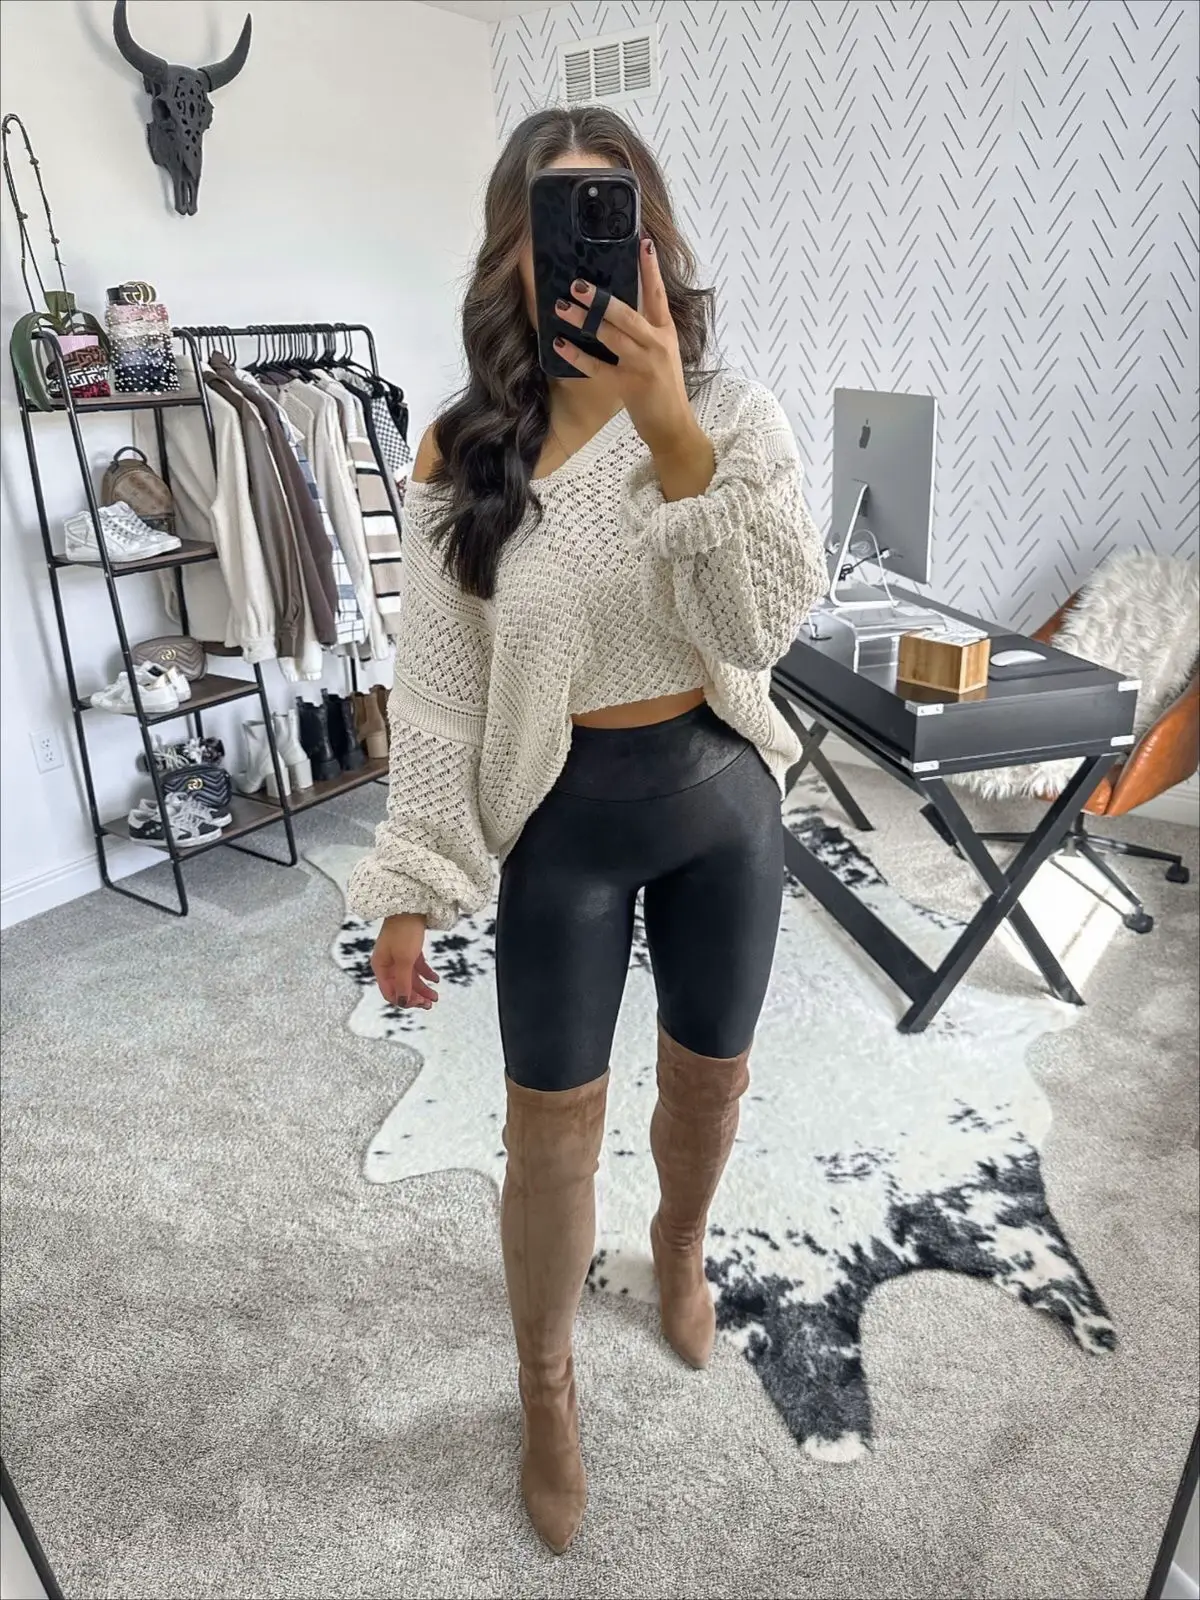 You can never go wrong with leggings and uggs. #ootd #outfitinspo